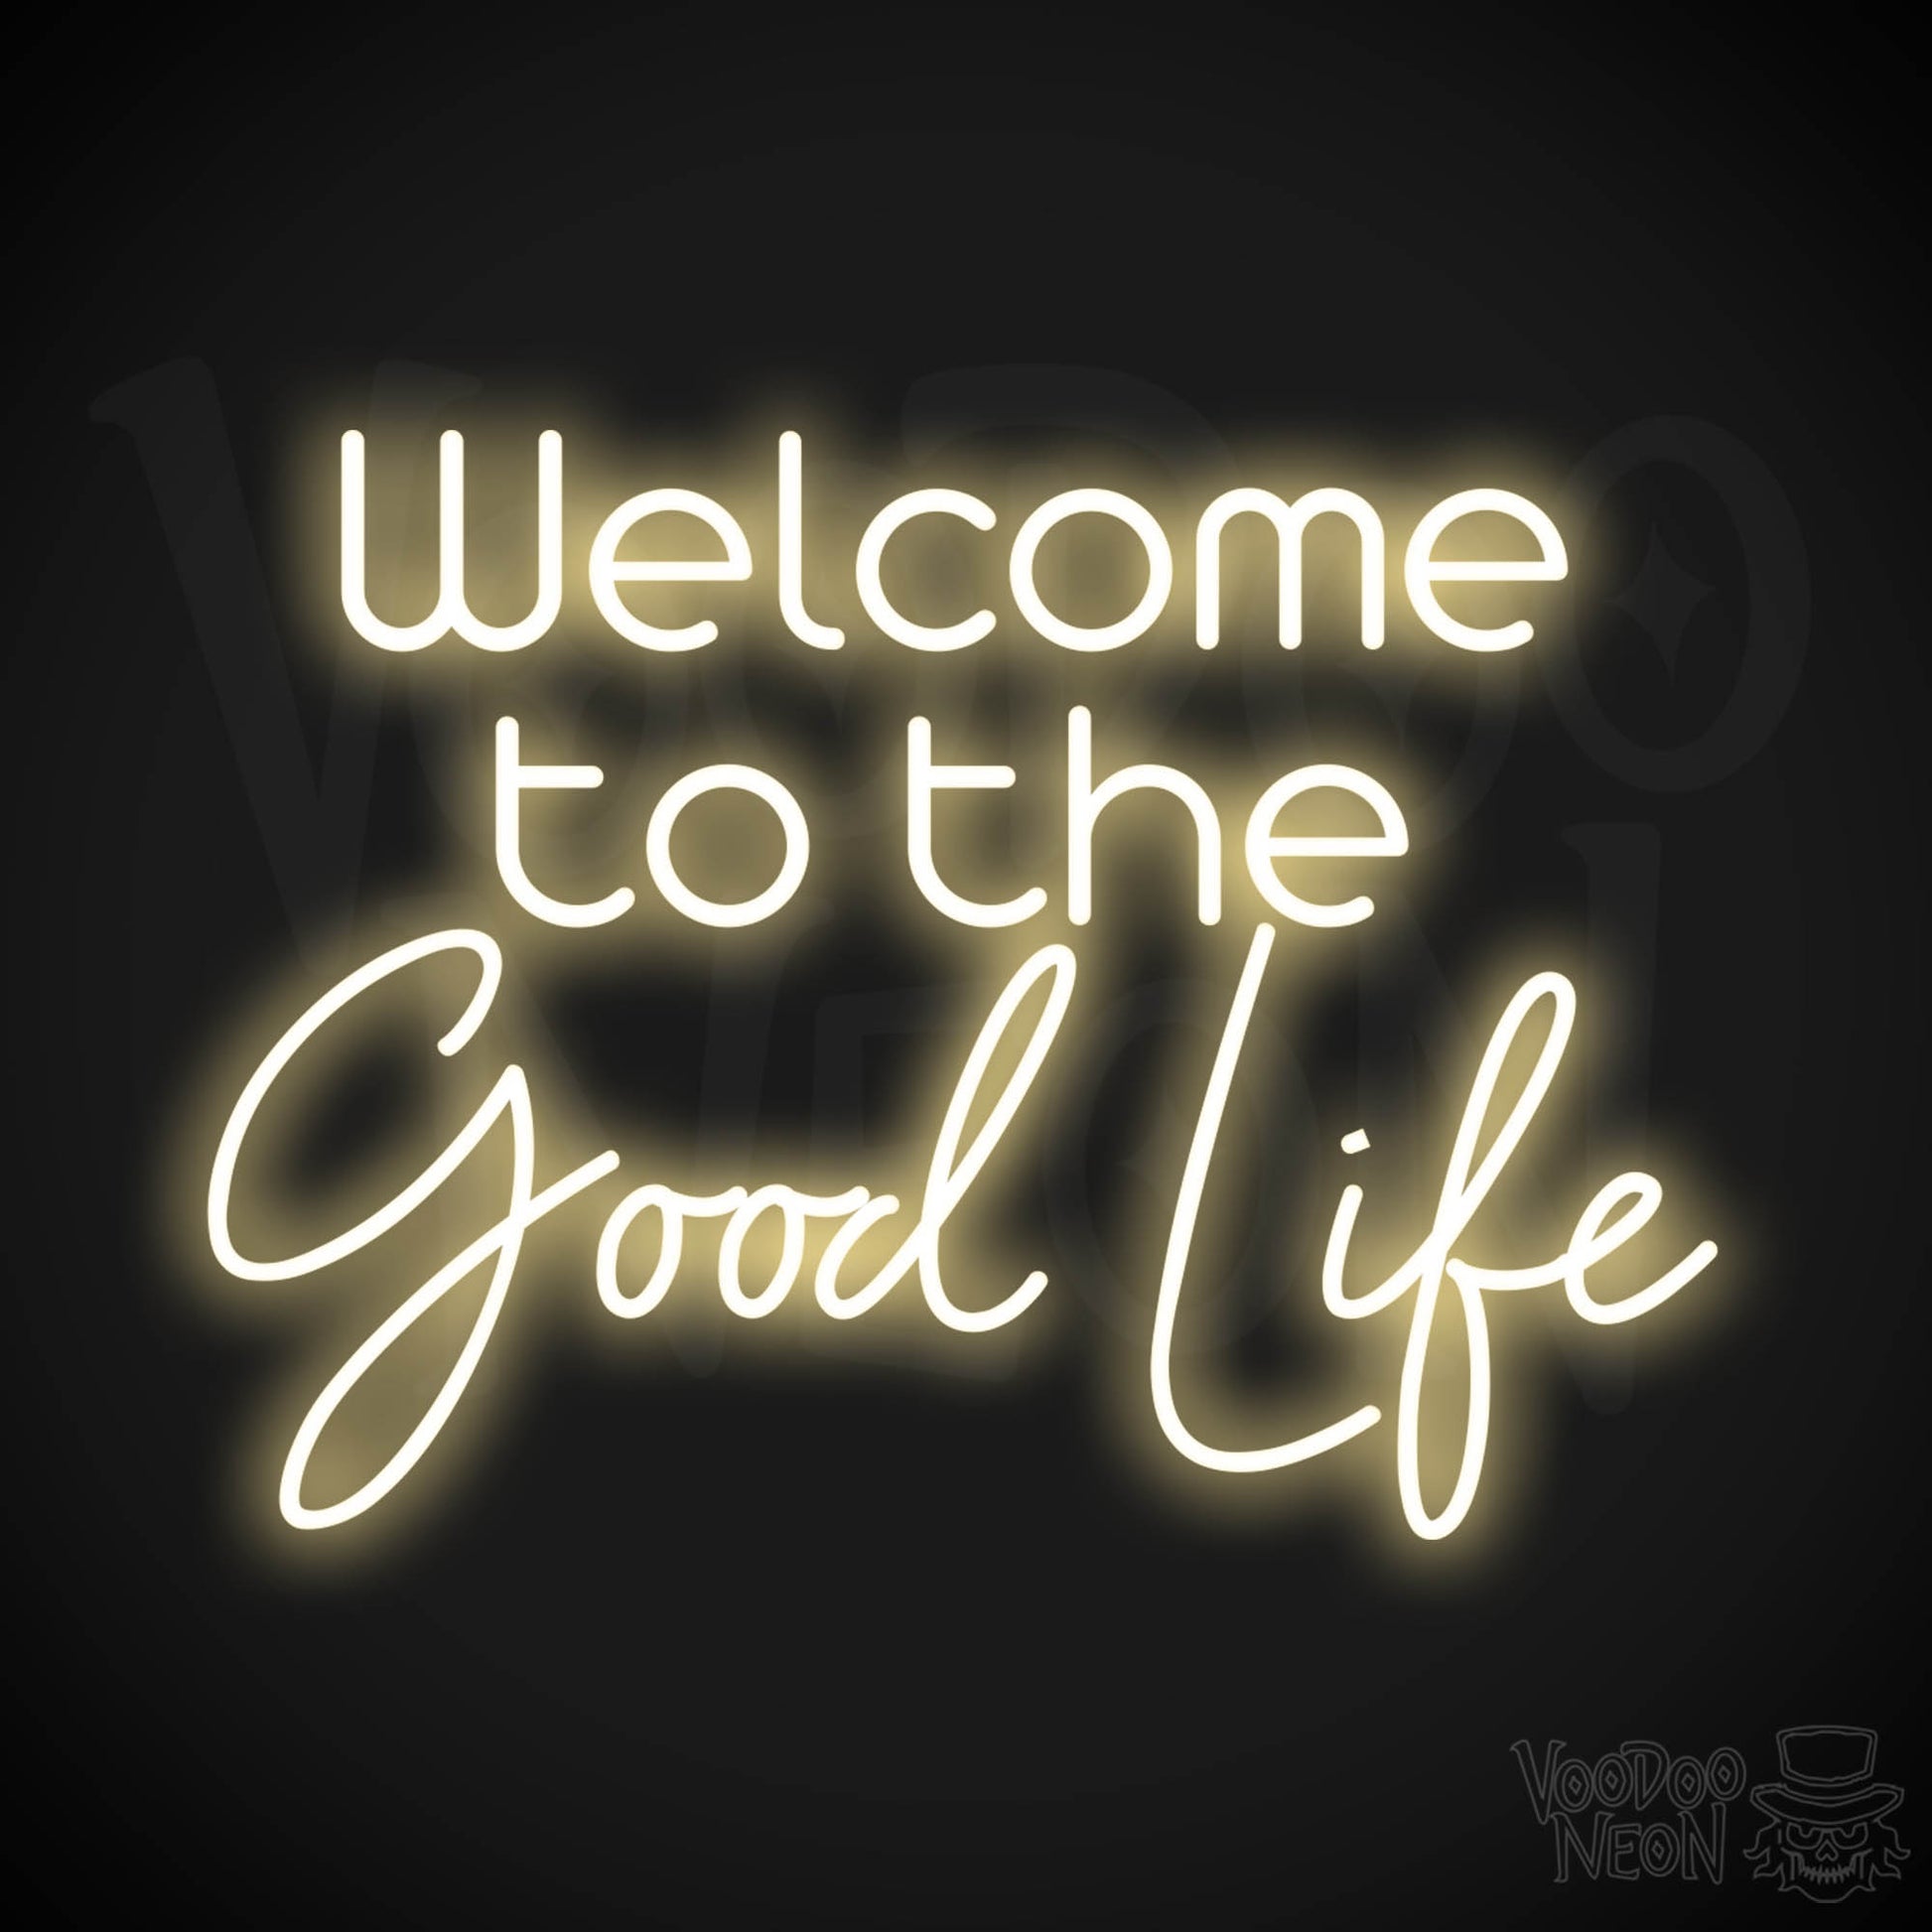 Welcome To The Good Life LED Neon - Warm White